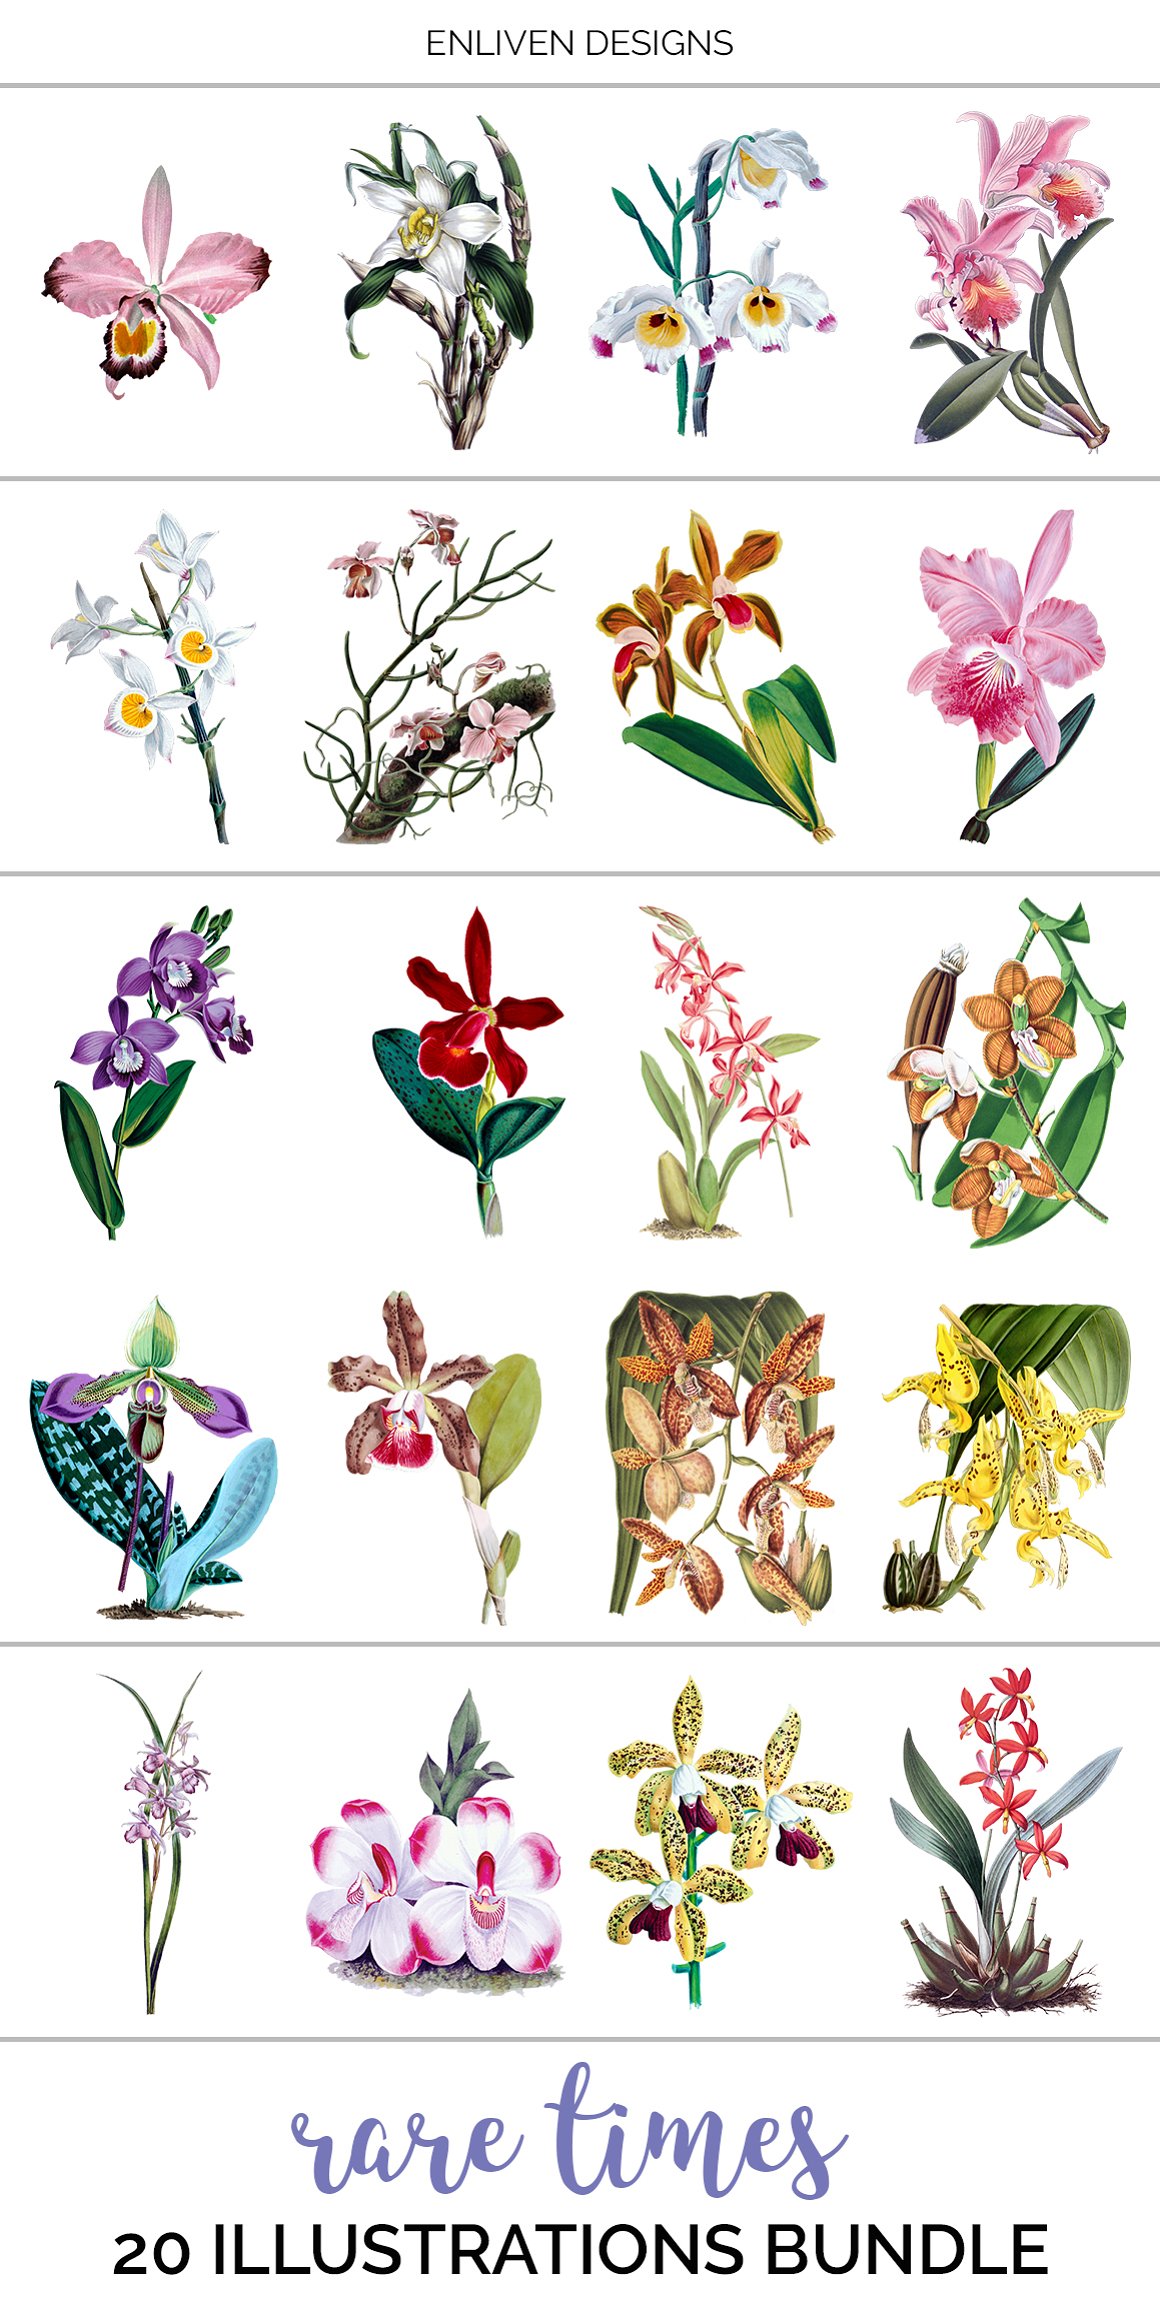 The handpicked orchids have been carefully color corrected to look fresh and new.